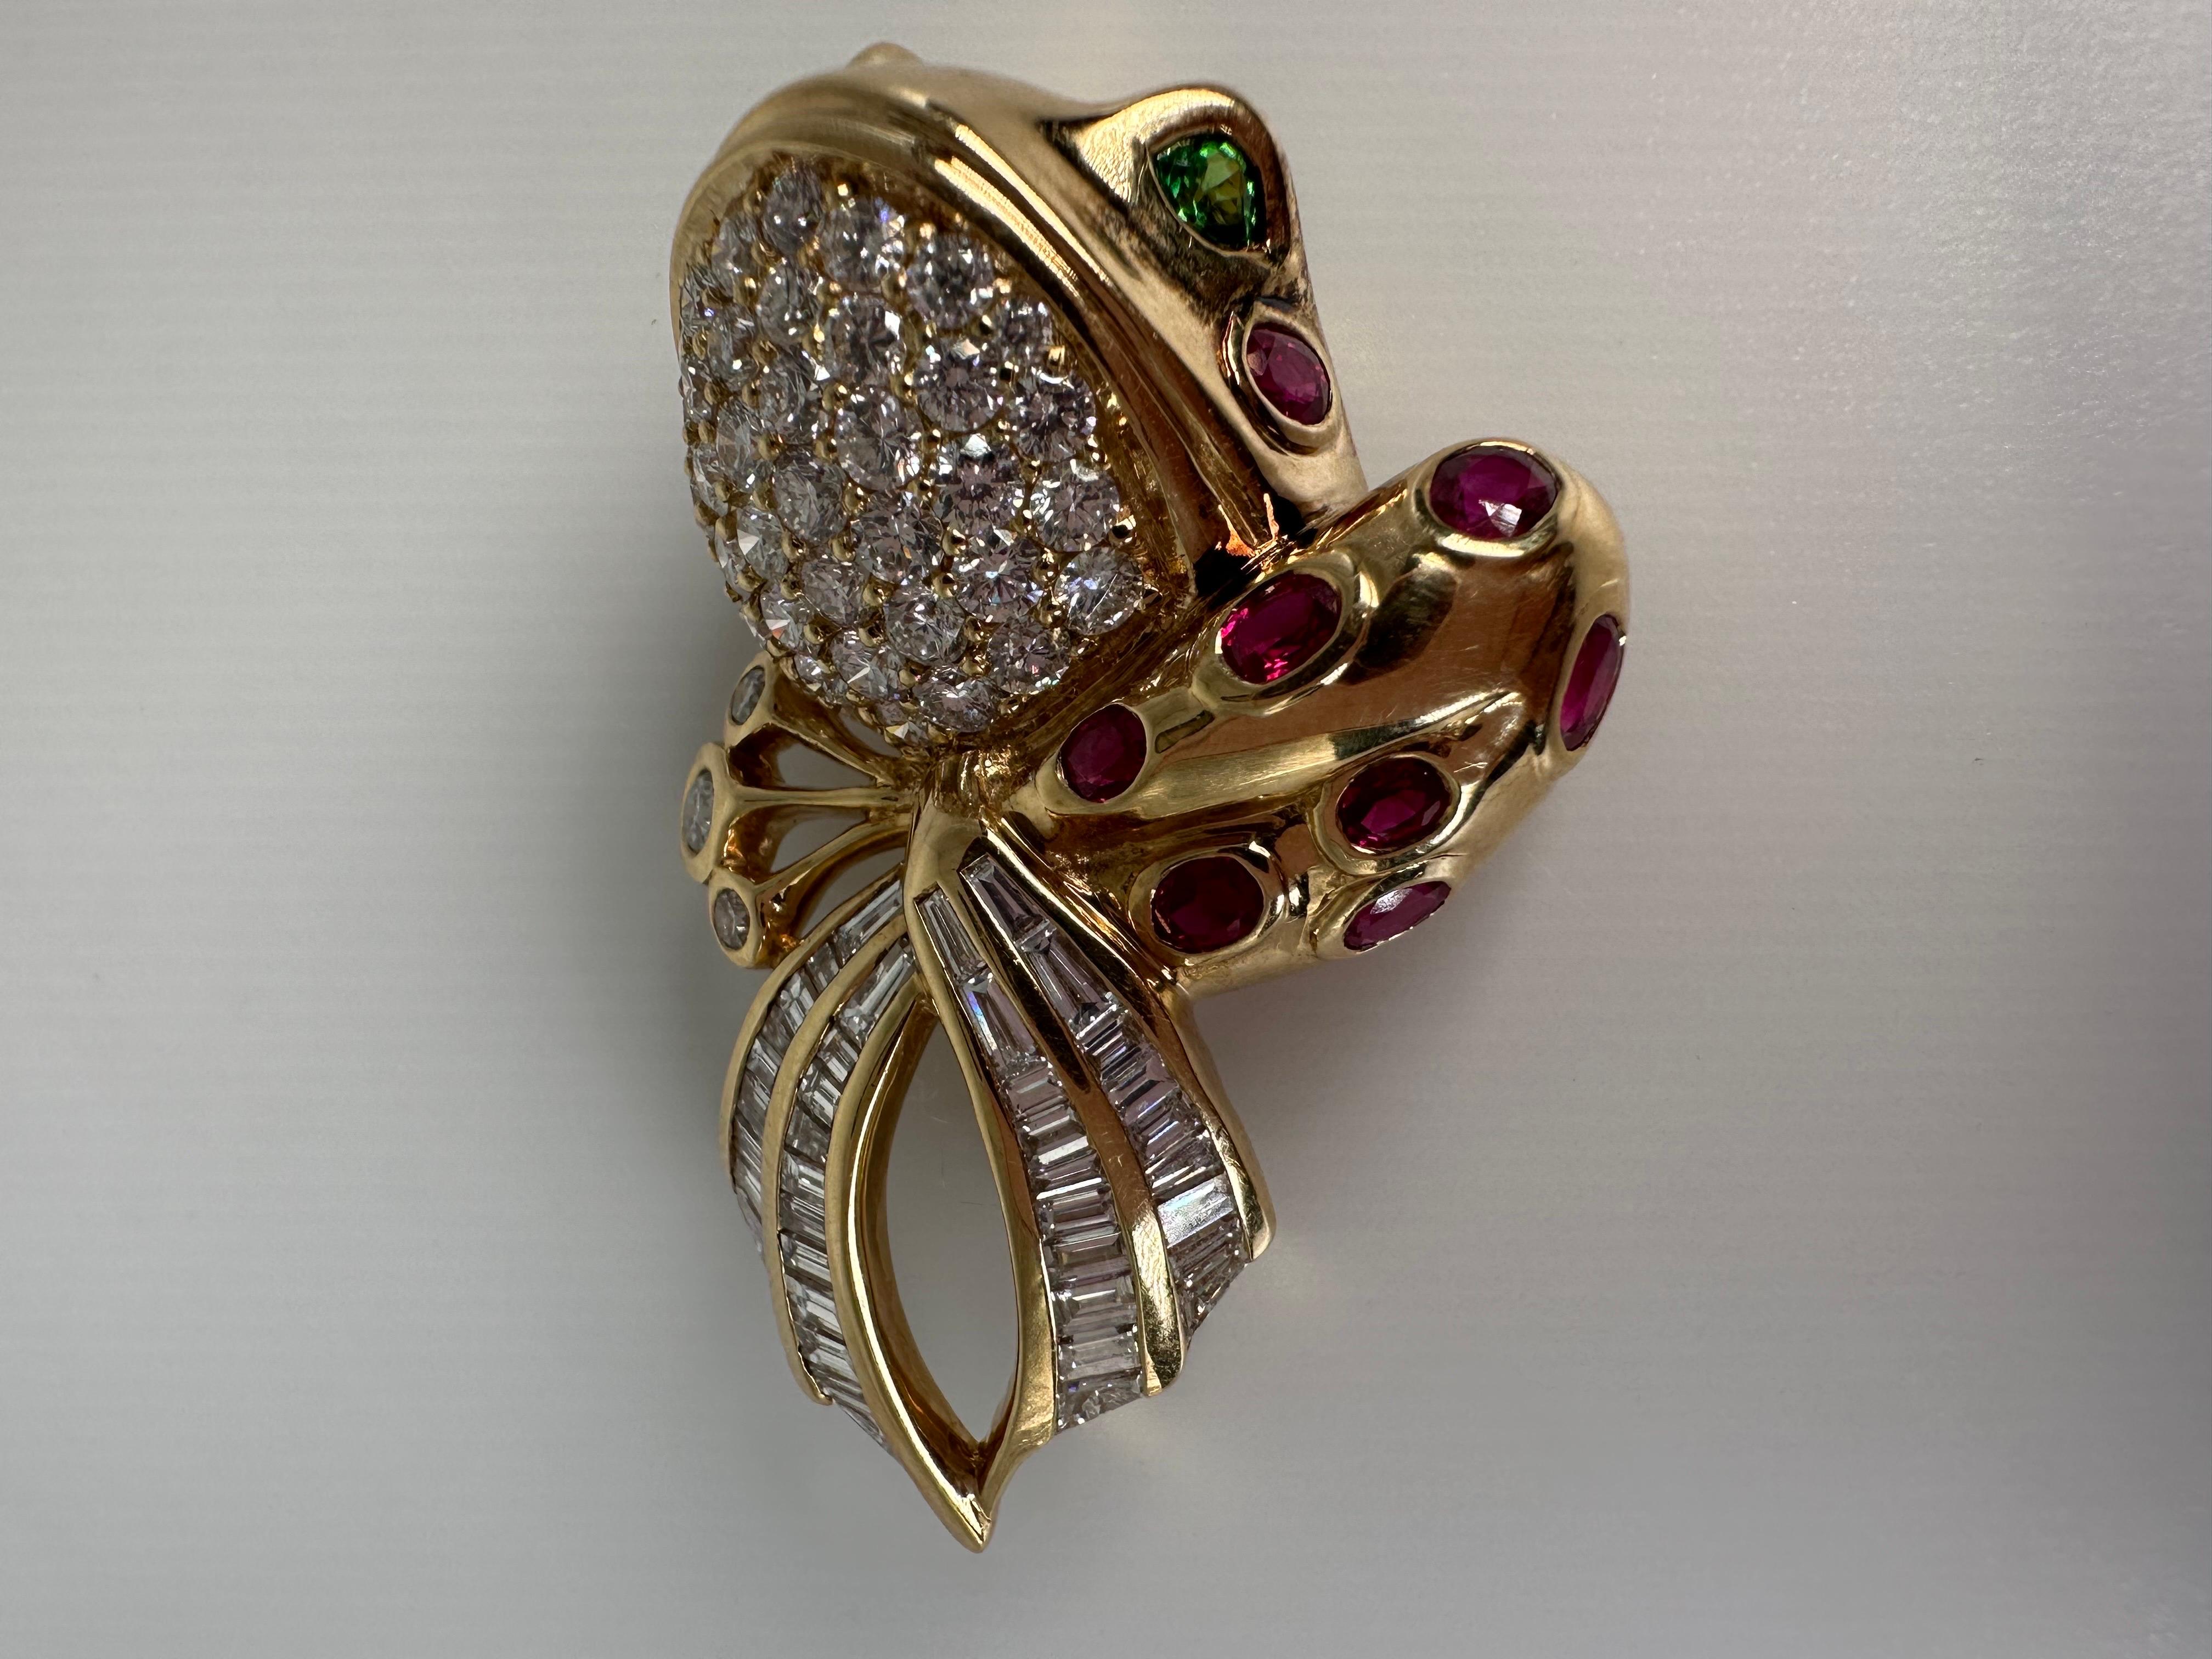 A frog pin in 18KT yellow gold made with natural diamonds, tsavorite and rubies.

METAL: 18KT
NATURAL DIAMOND(S)
Clarity/Color: VS/F-G
Cut: Round Brilliant
Carat:2c.15Ct
Grams:25.35
Item 18000014APOK


WHAT YOU GET AT STAMPAR JEWELERS:
Stampar